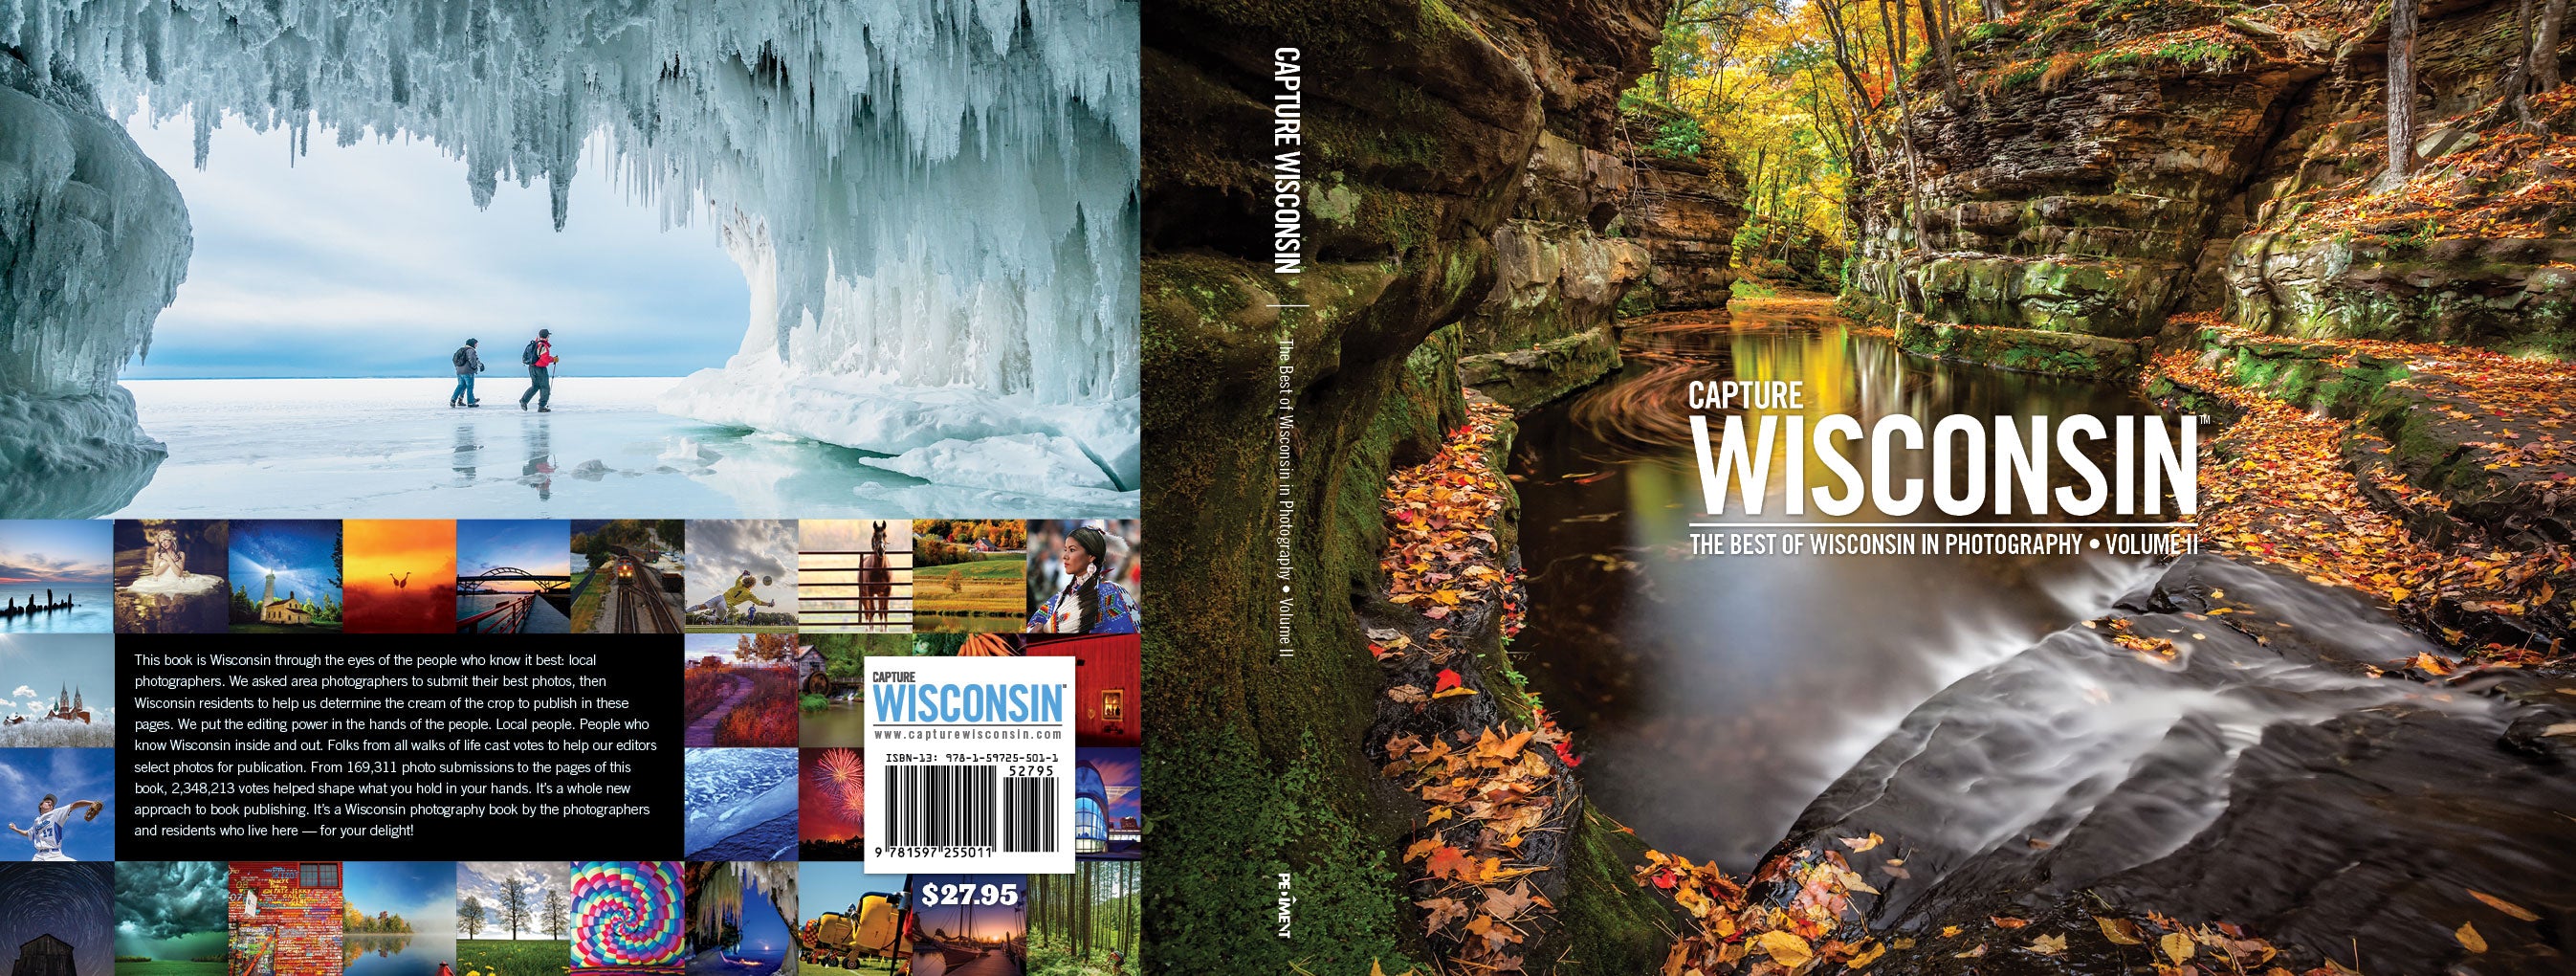 Capture Wisconsin II front and back cover